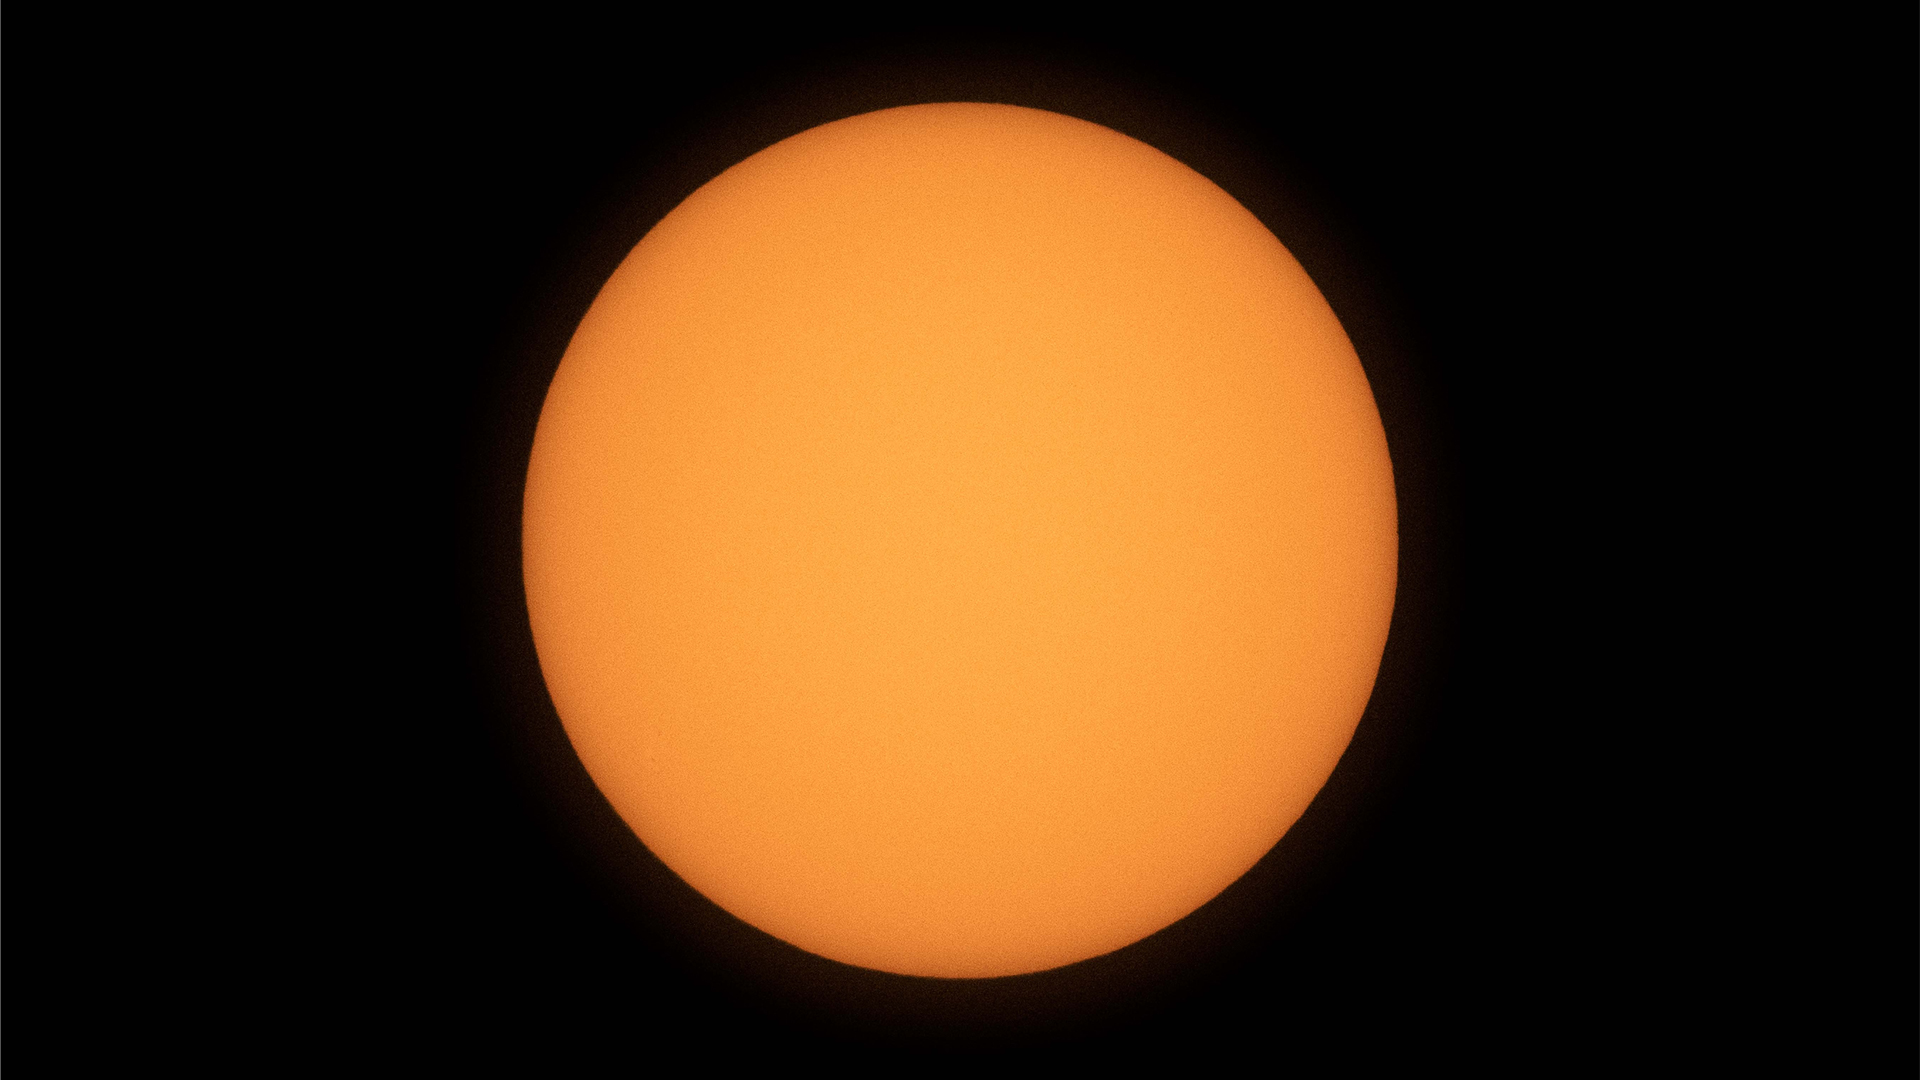 ow to photograph a solar eclipse: photo of the sun